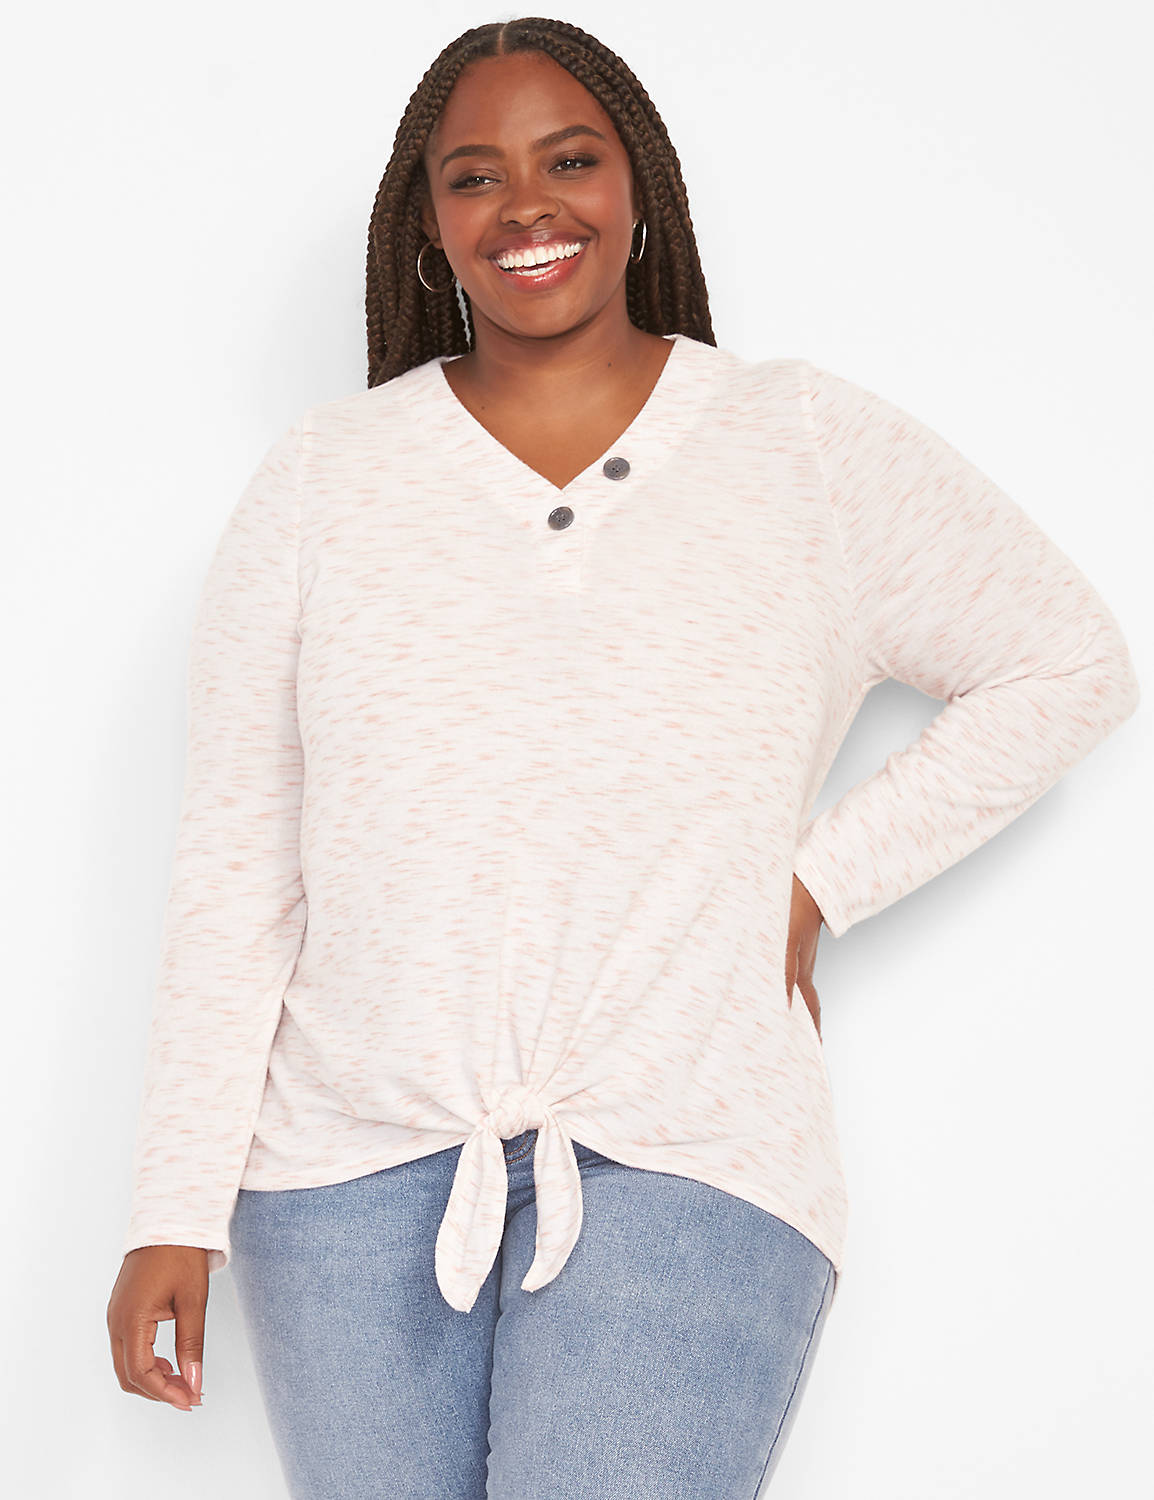 Long Sleeve Vneck Knit Top With Tie Bottom & Button Detail 1124656:PANTONE Coral Pink:34/36 Product Image 1